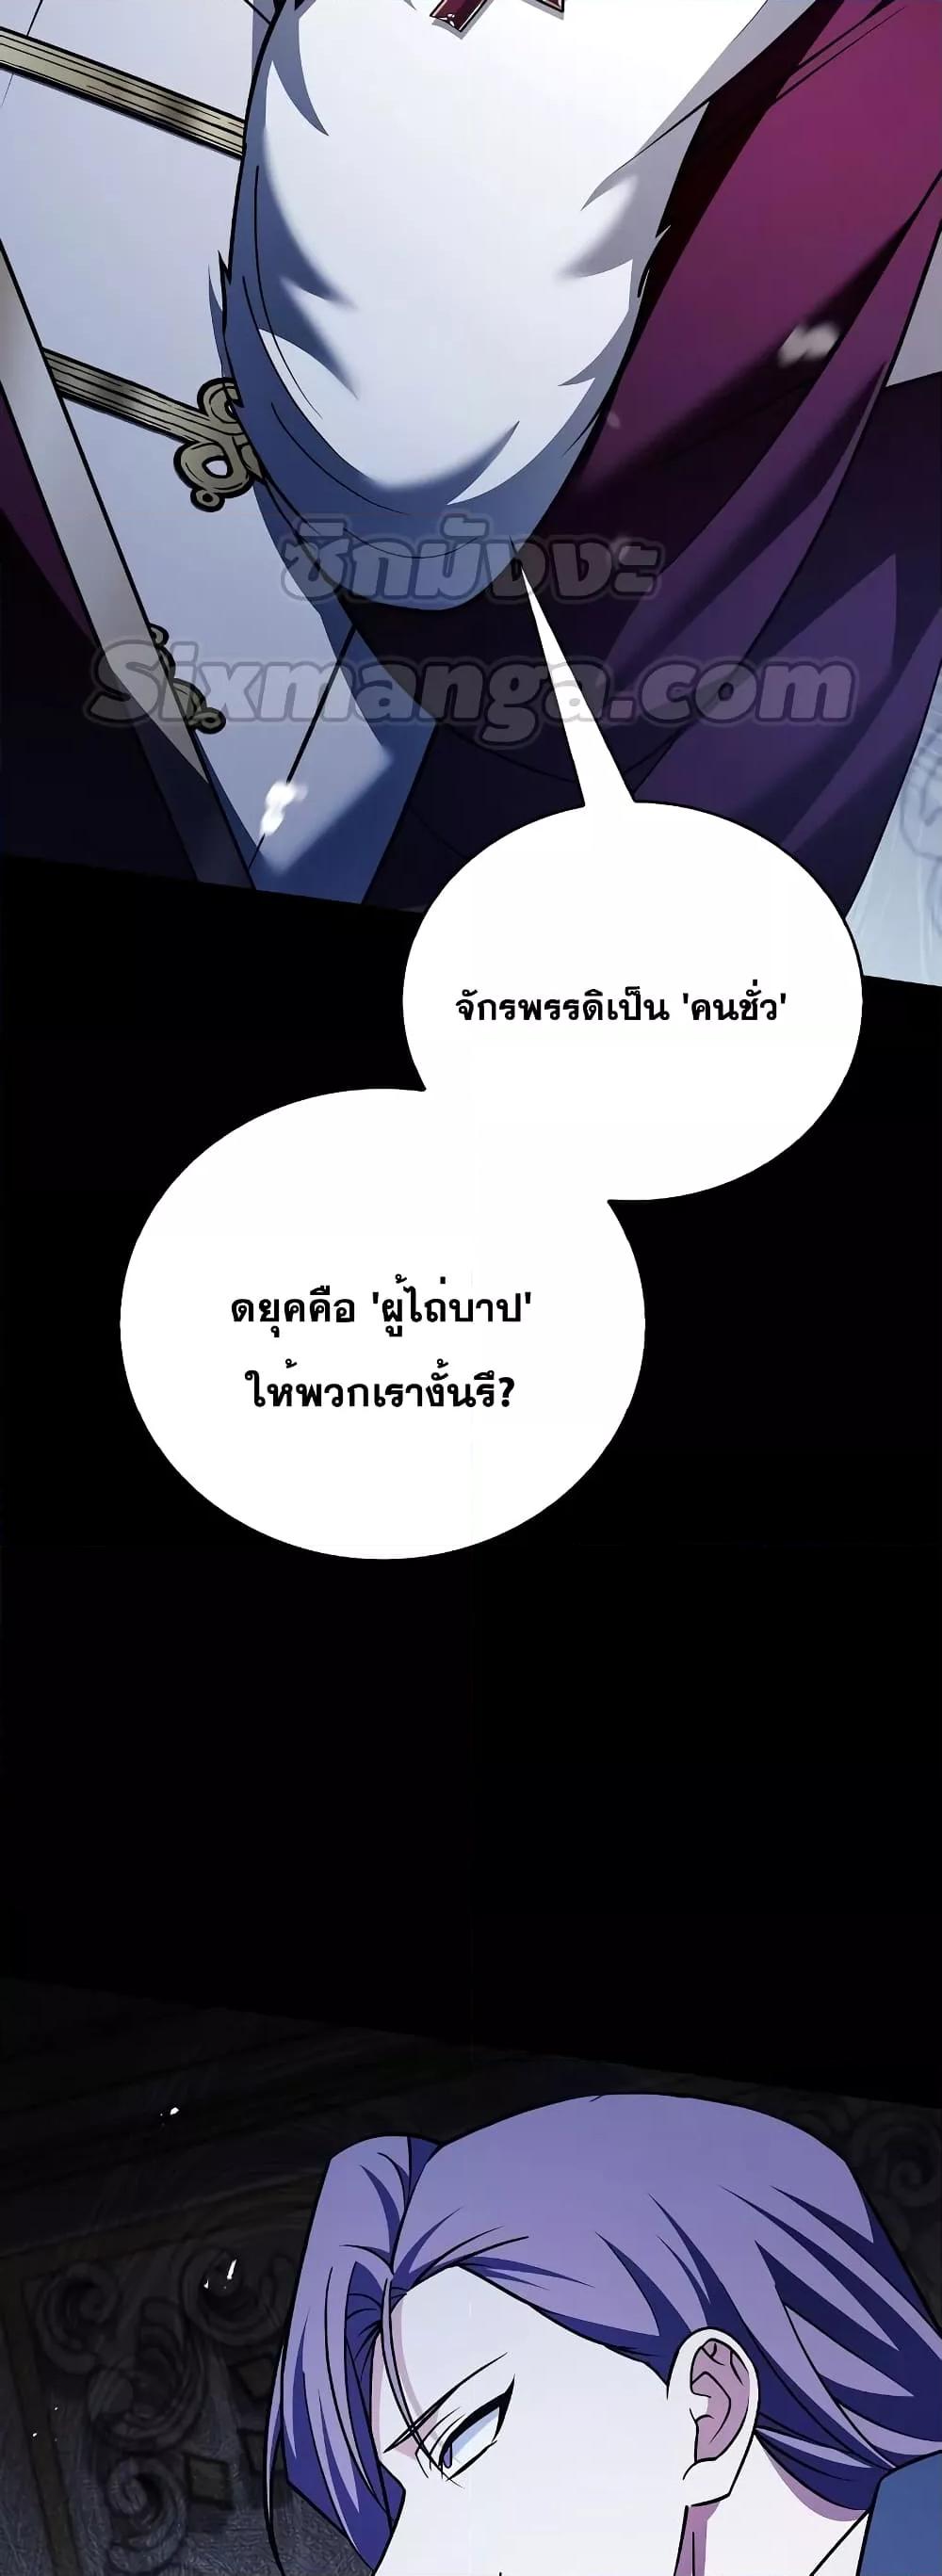 I’m Not That Kind of Talent ตอนที่ 34 081